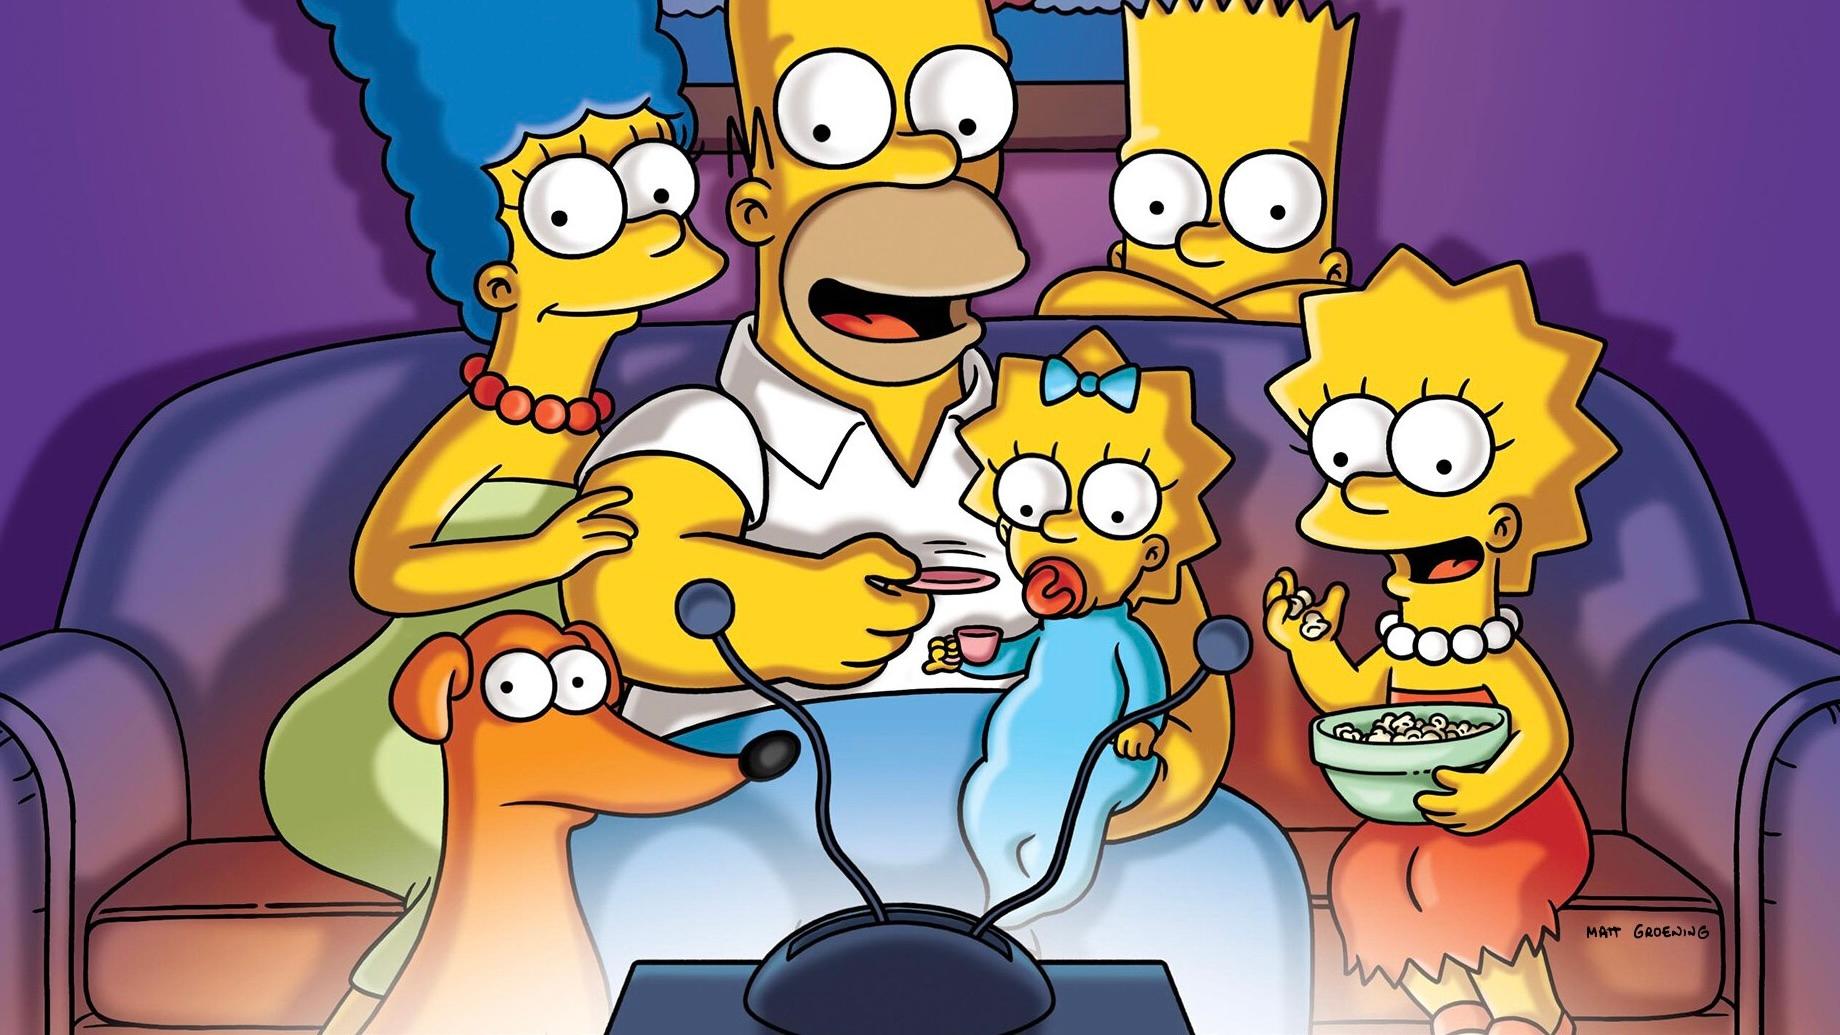 The Simpsons family.